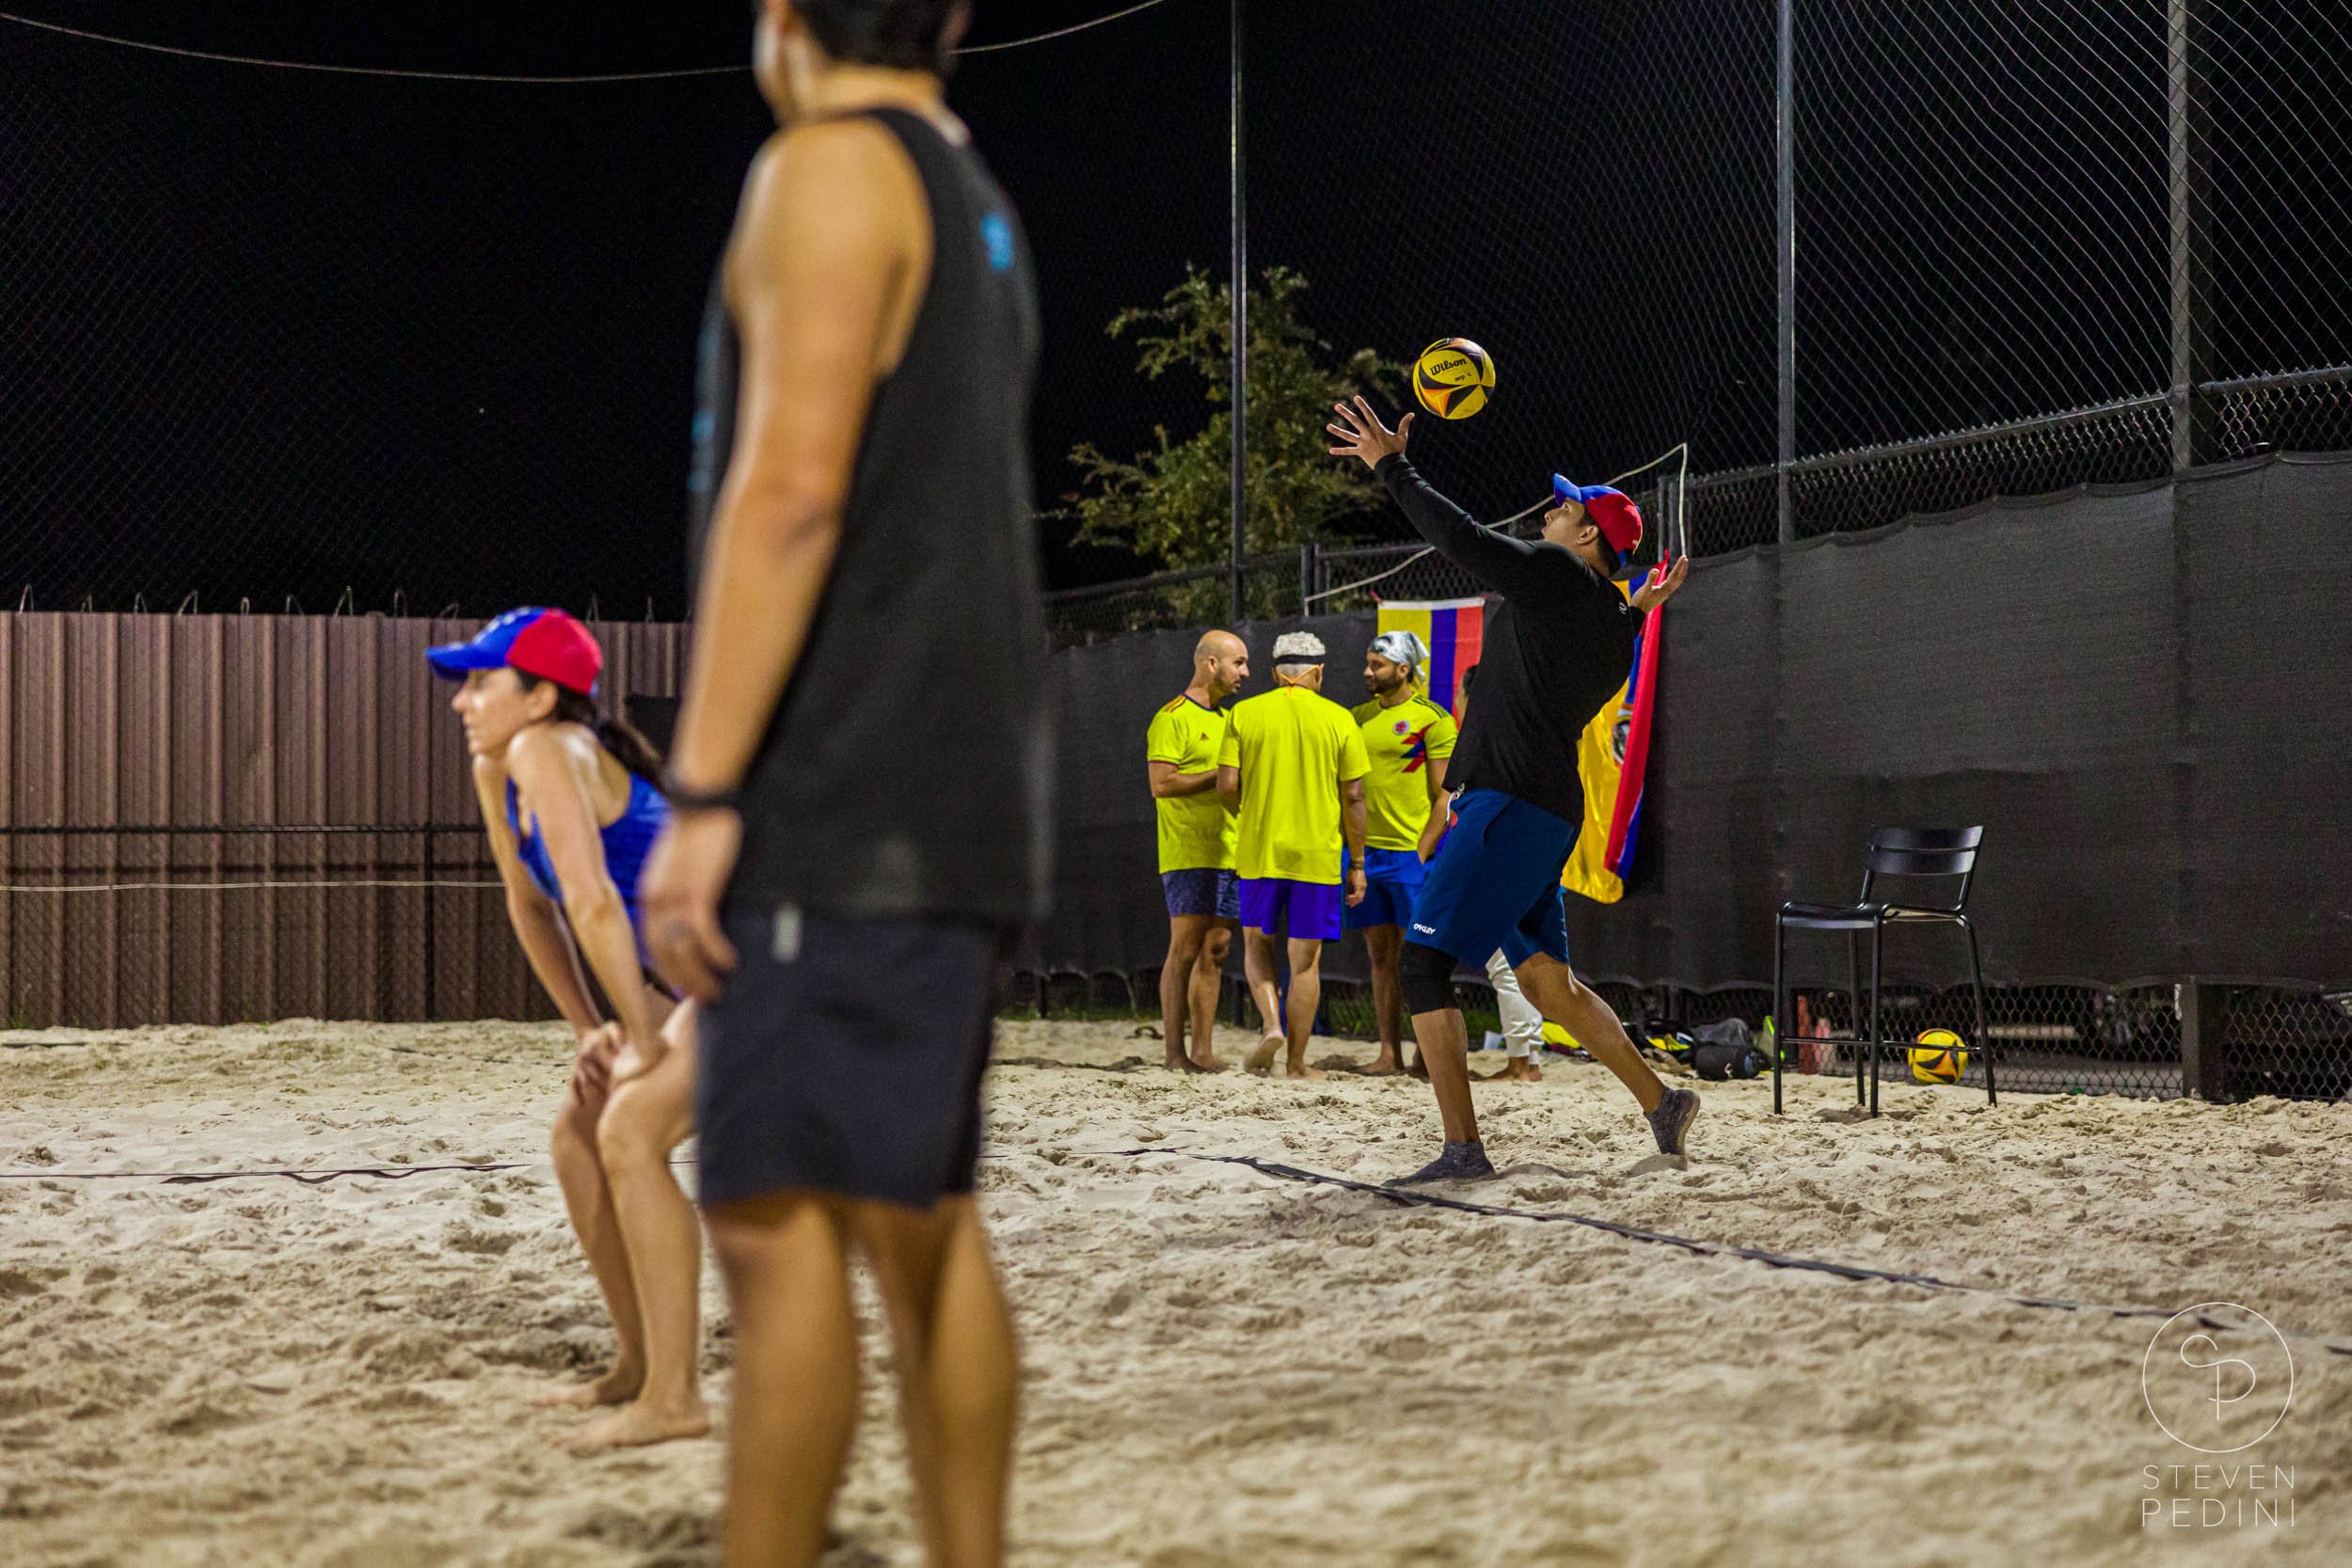 Steven Pedini Photography - Bumpy Pickle - Sand Volleyball - Houston TX - World Cup of Volleyball - 00394.jpg